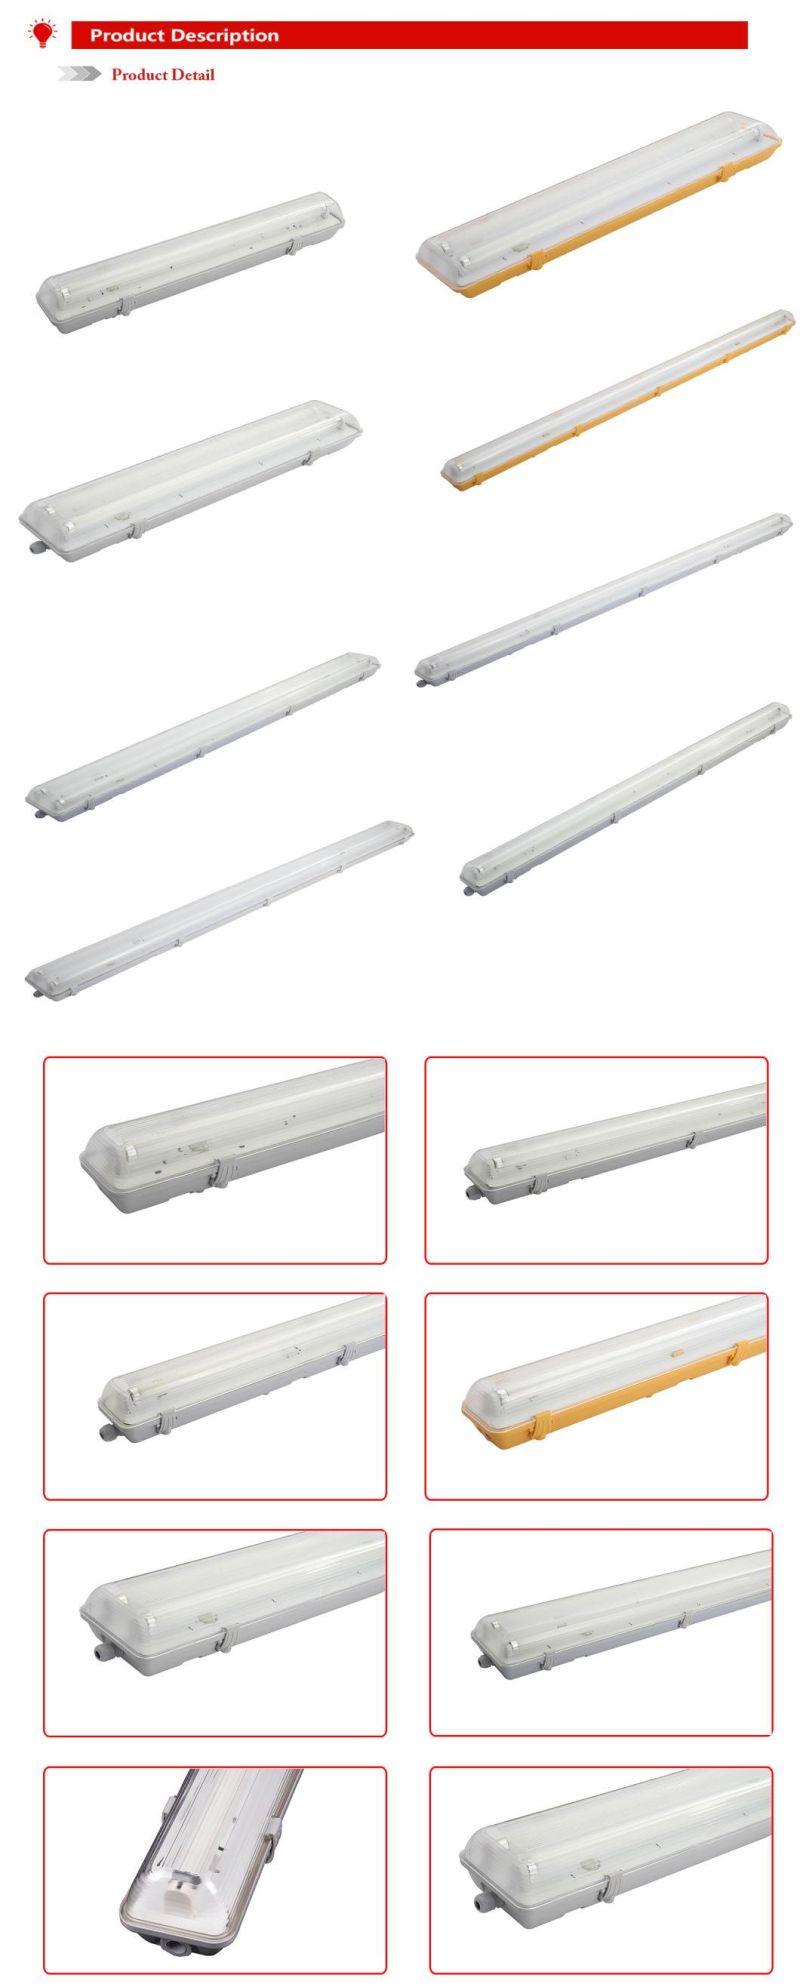 New Design High Quality Best Price Factory CE Ex Fluorescent Light Fittings